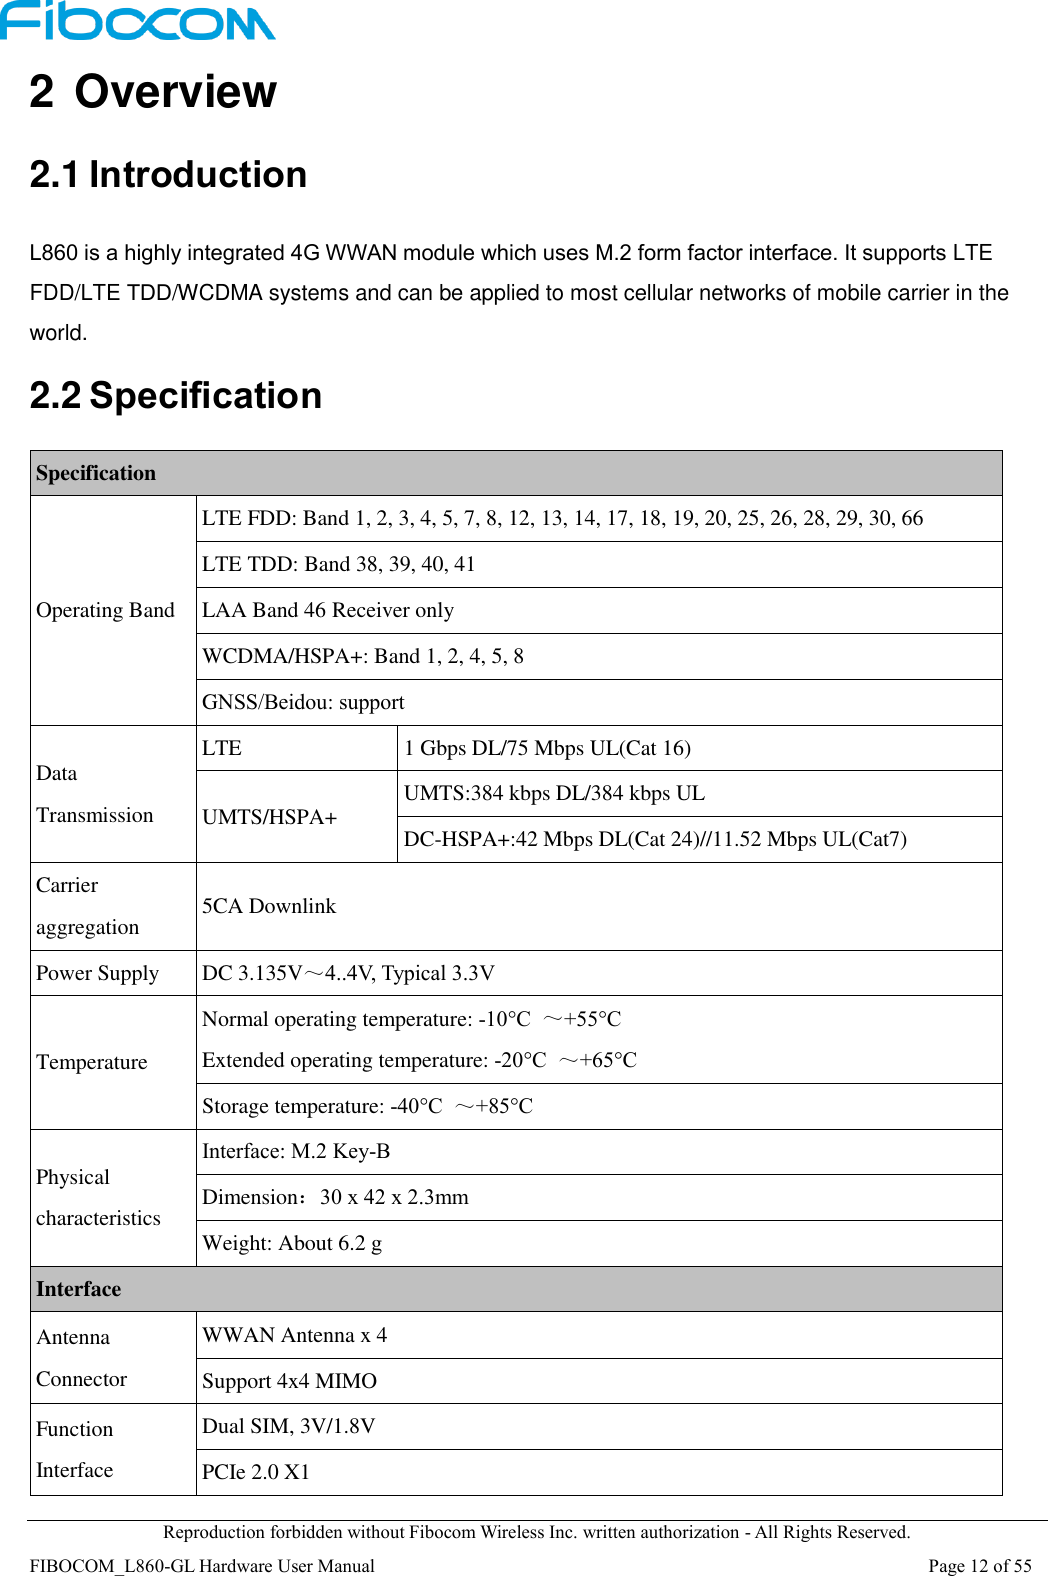  Reproduction forbidden without Fibocom Wireless Inc. written authorization - All Rights Reserved. FIBOCOM_L860-GL Hardware User Manual                                                                                                                      Page 12 of 55 2 Overview 2.1 Introduction L860 is a highly integrated 4G WWAN module which uses M.2 form factor interface. It supports LTE FDD/LTE TDD/WCDMA systems and can be applied to most cellular networks of mobile carrier in the world. 2.2 Specification Specification Operating Band LTE FDD: Band 1, 2, 3, 4, 5, 7, 8, 12, 13, 14, 17, 18, 19, 20, 25, 26, 28, 29, 30, 66 LTE TDD: Band 38, 39, 40, 41 LAA Band 46 Receiver only WCDMA/HSPA+: Band 1, 2, 4, 5, 8 GNSS/Beidou: support Data Transmission LTE   1 Gbps DL/75 Mbps UL(Cat 16) UMTS/HSPA+ UMTS:384 kbps DL/384 kbps UL DC-HSPA+:42 Mbps DL(Cat 24)//11.52 Mbps UL(Cat7) Carrier aggregation 5CA Downlink   Power Supply DC 3.135V～4..4V, Typical 3.3V Temperature Normal operating temperature: -10°C  ～+55°C Extended operating temperature: -20°C  ～+65°C Storage temperature: -40°C  ～+85°C Physical characteristics Interface: M.2 Key-B Dimension：30 x 42 x 2.3mm Weight: About 6.2 g Interface Antenna Connector WWAN Antenna x 4 Support 4x4 MIMO Function Interface Dual SIM, 3V/1.8V PCIe 2.0 X1 